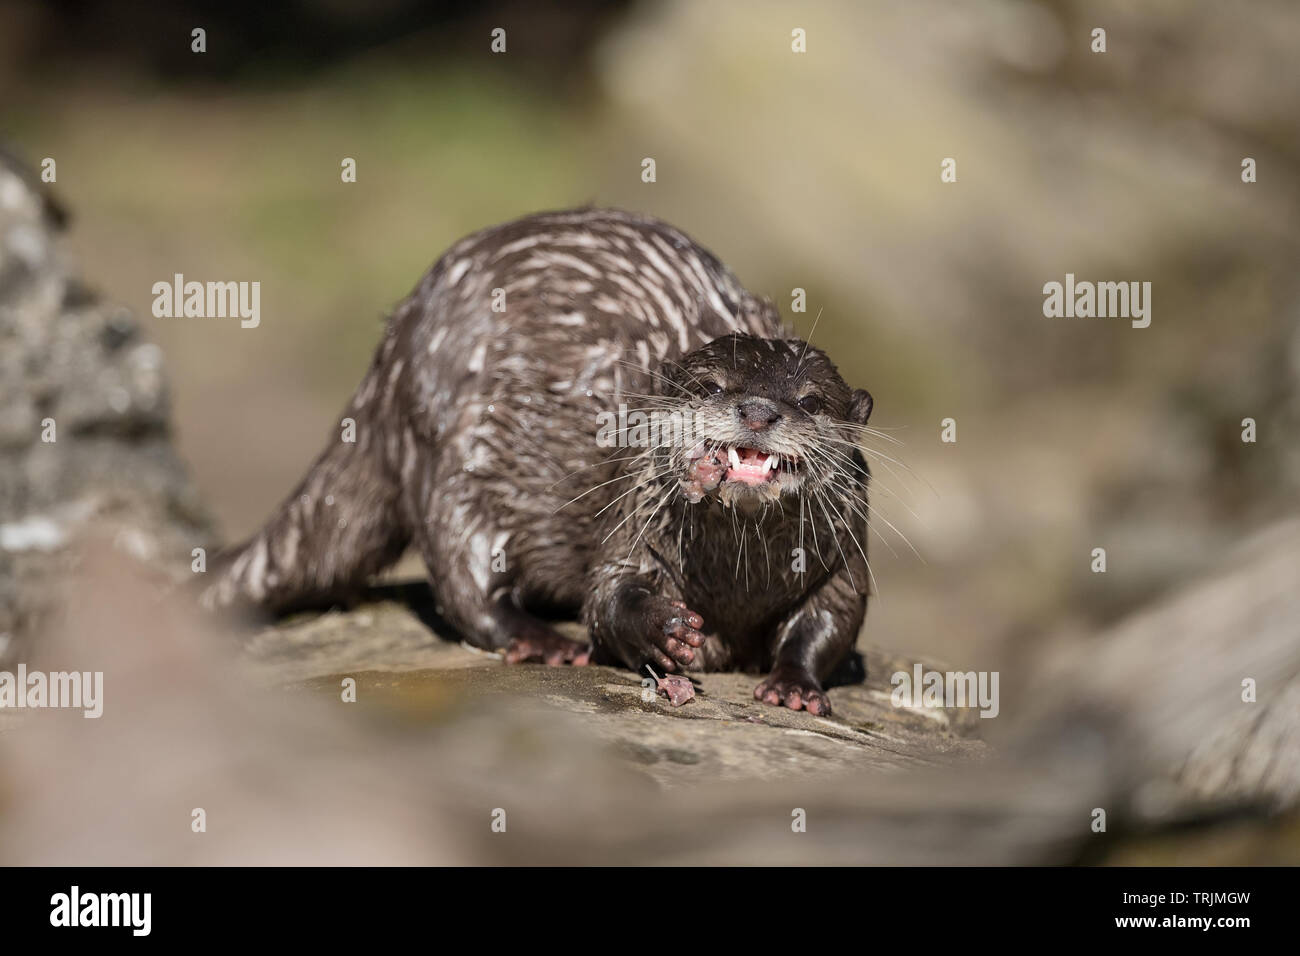 Asian small-clawed otter (Aonyx cinerea) eating a fish, making funny faces Stock Photo